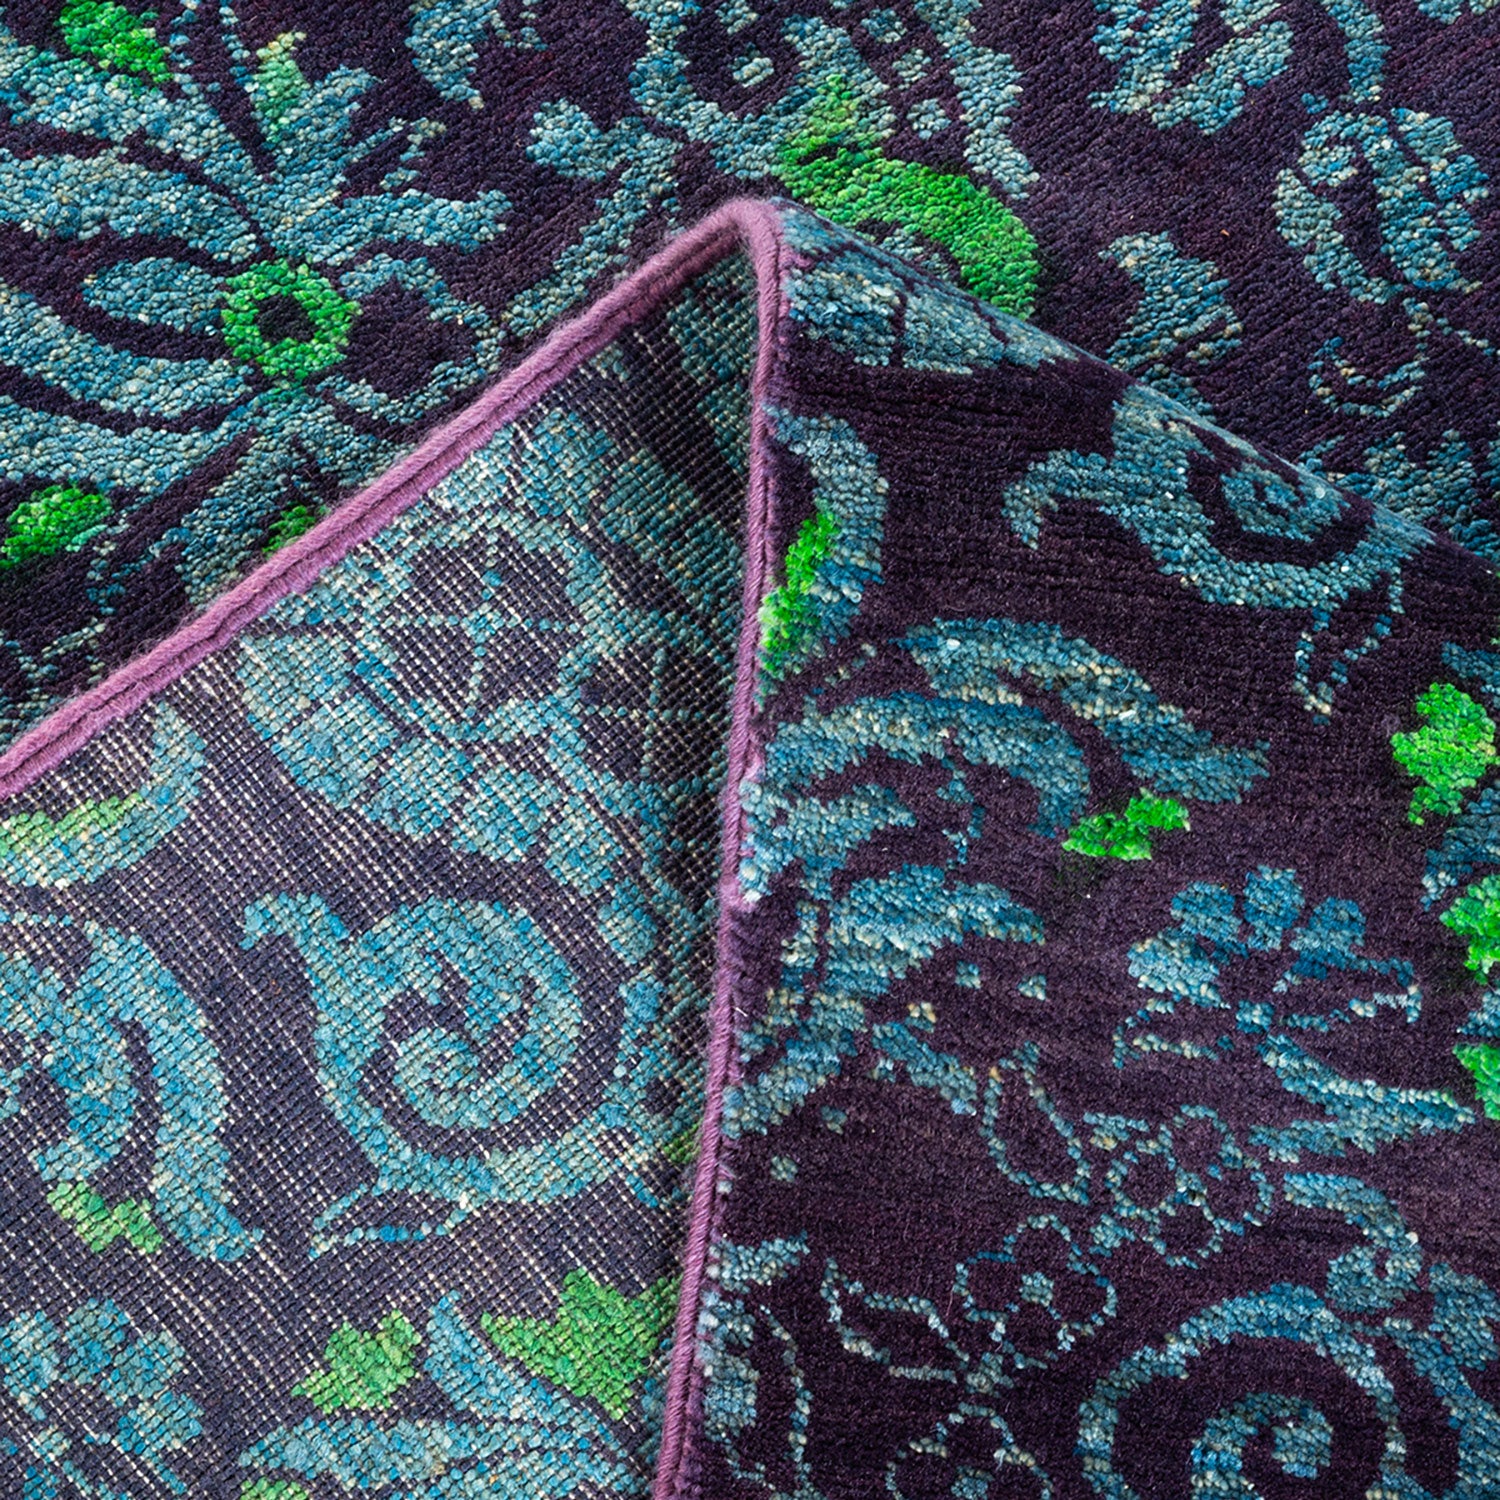 Close-up of a dark fabric with intricate floral pattern and textured surface.